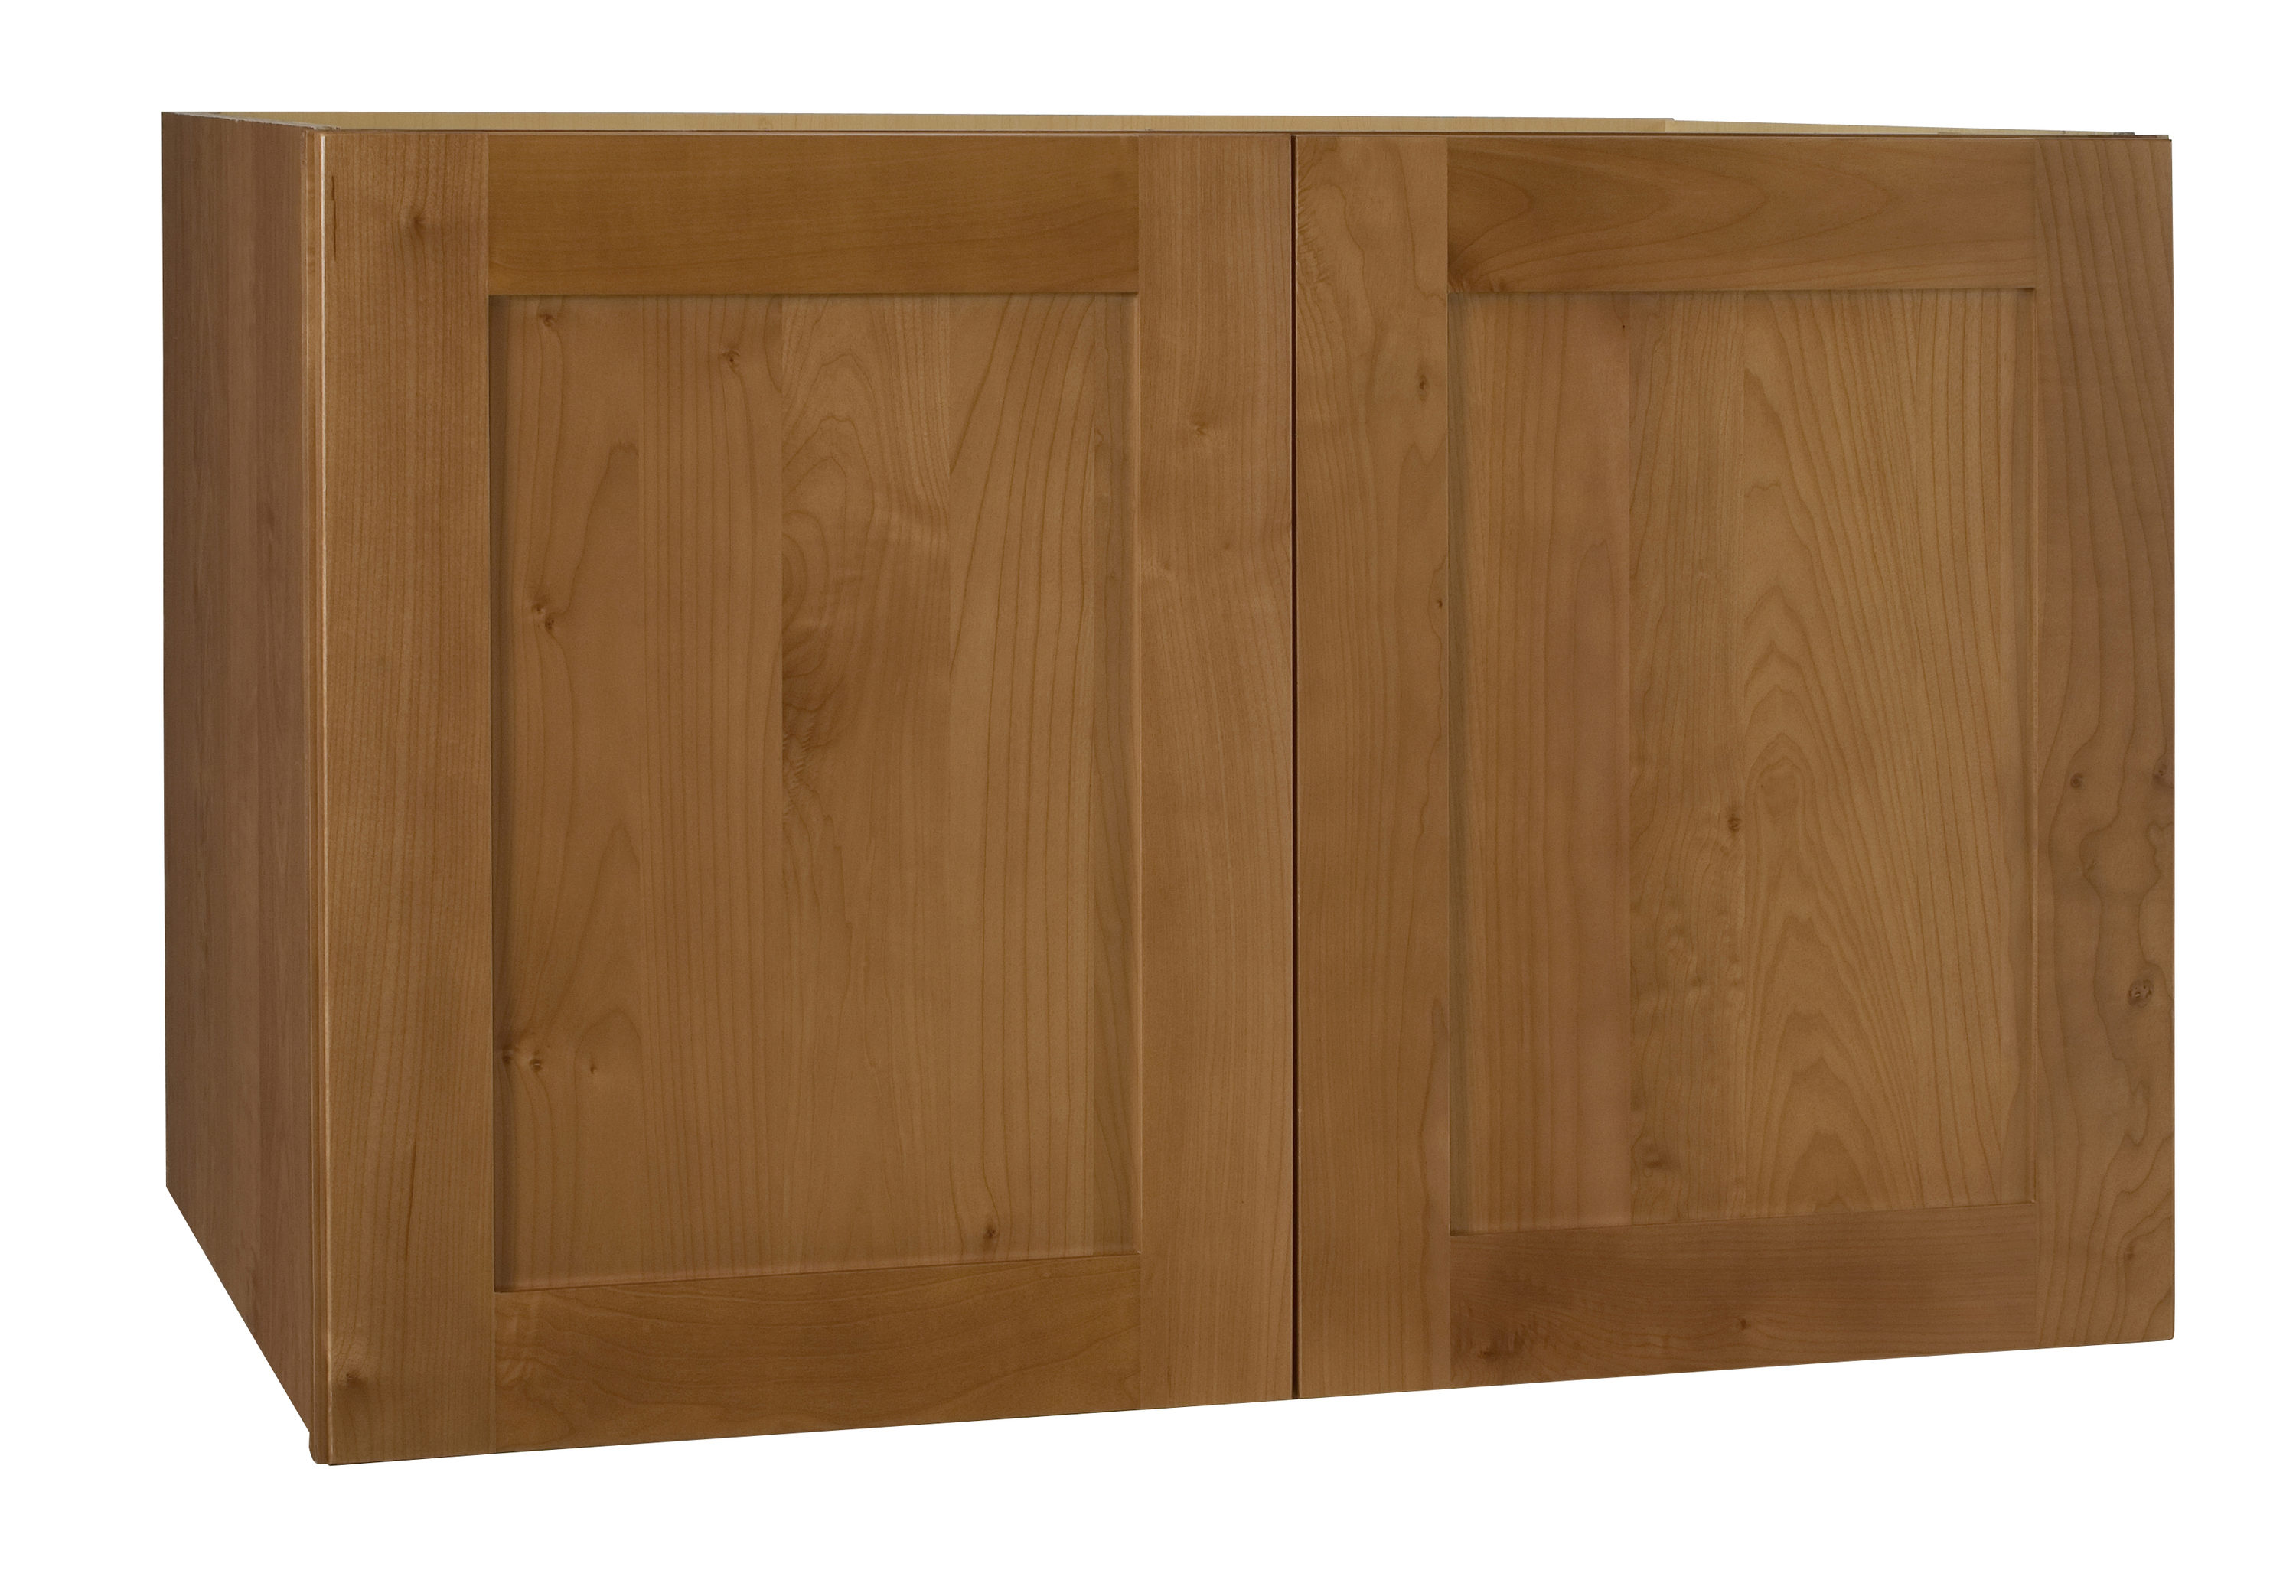 Luxxe Cabinetry Heston 36-in W x 24-in H x 12-in D Cider Stained Door ...